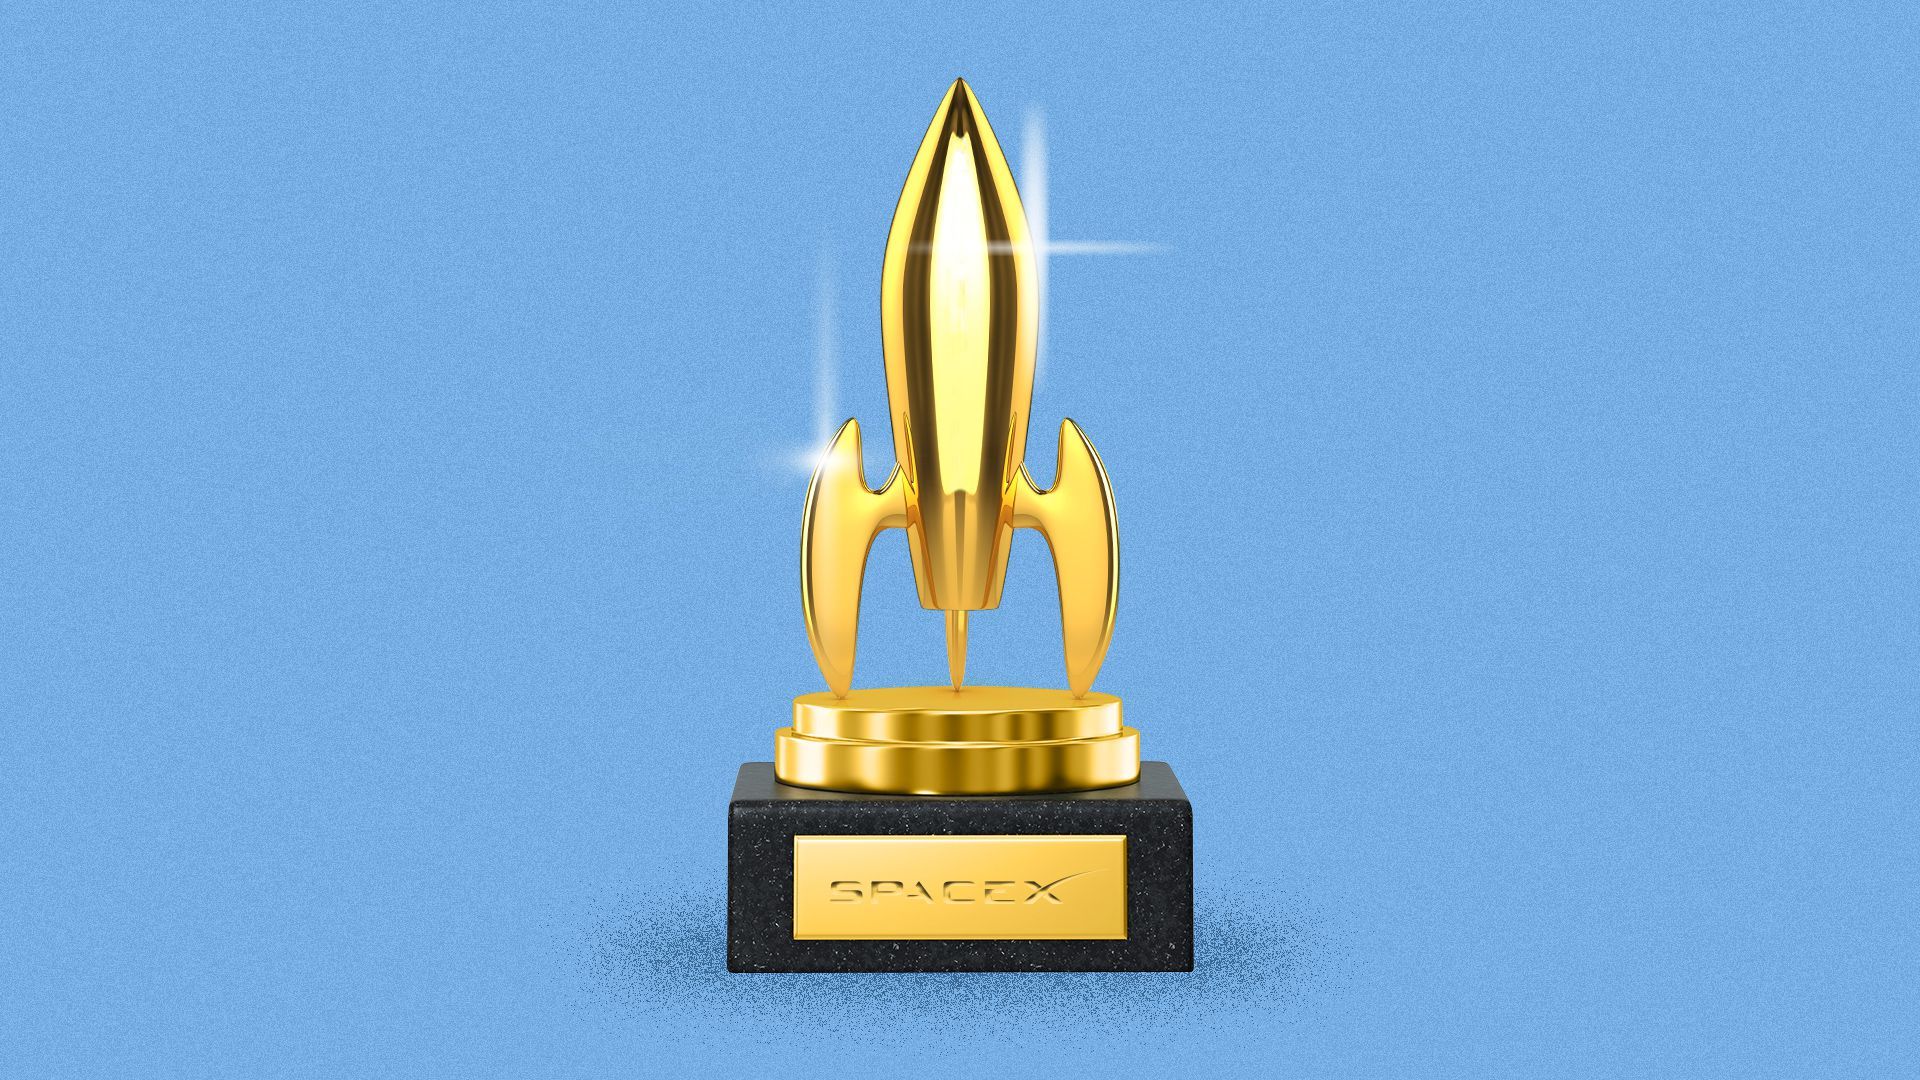 Illustration of a golden rocket trophy with the SpaceX logo on the front. 